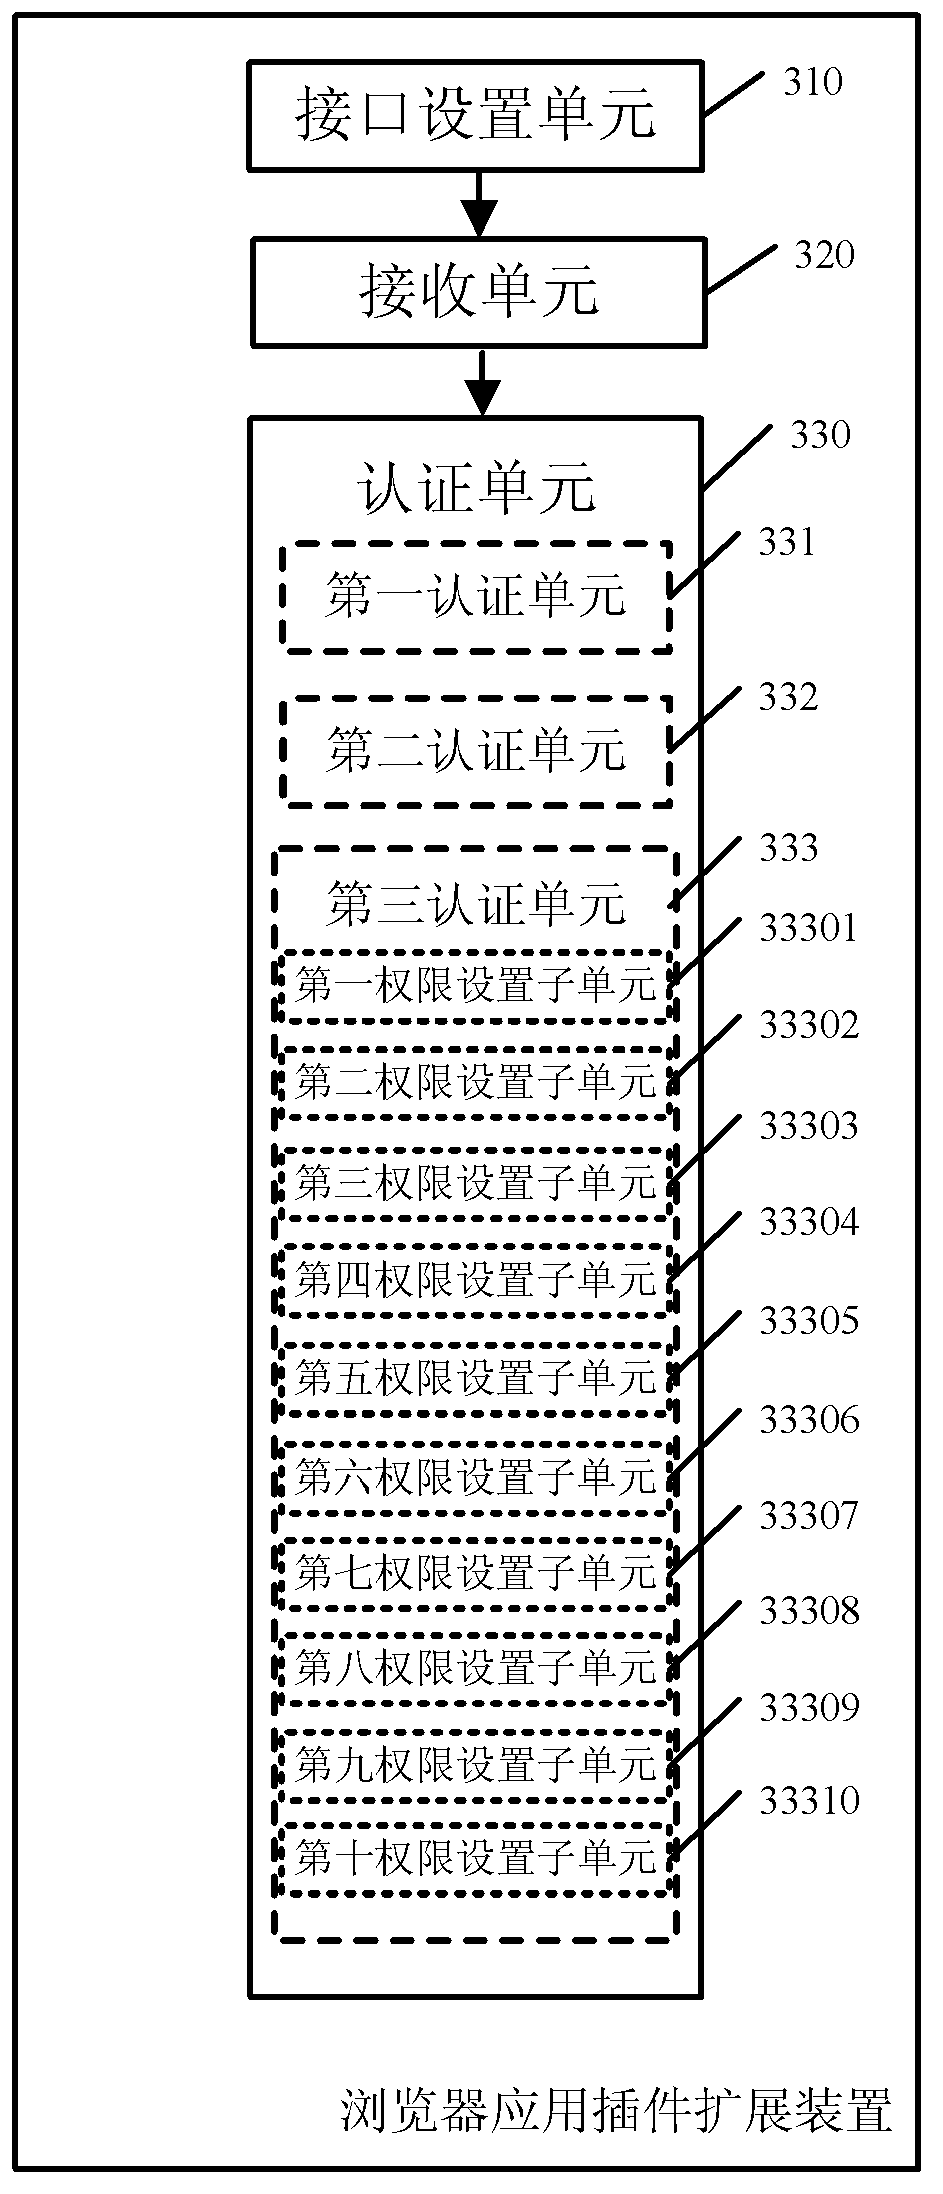 Device and method for extending browser application plug-ins